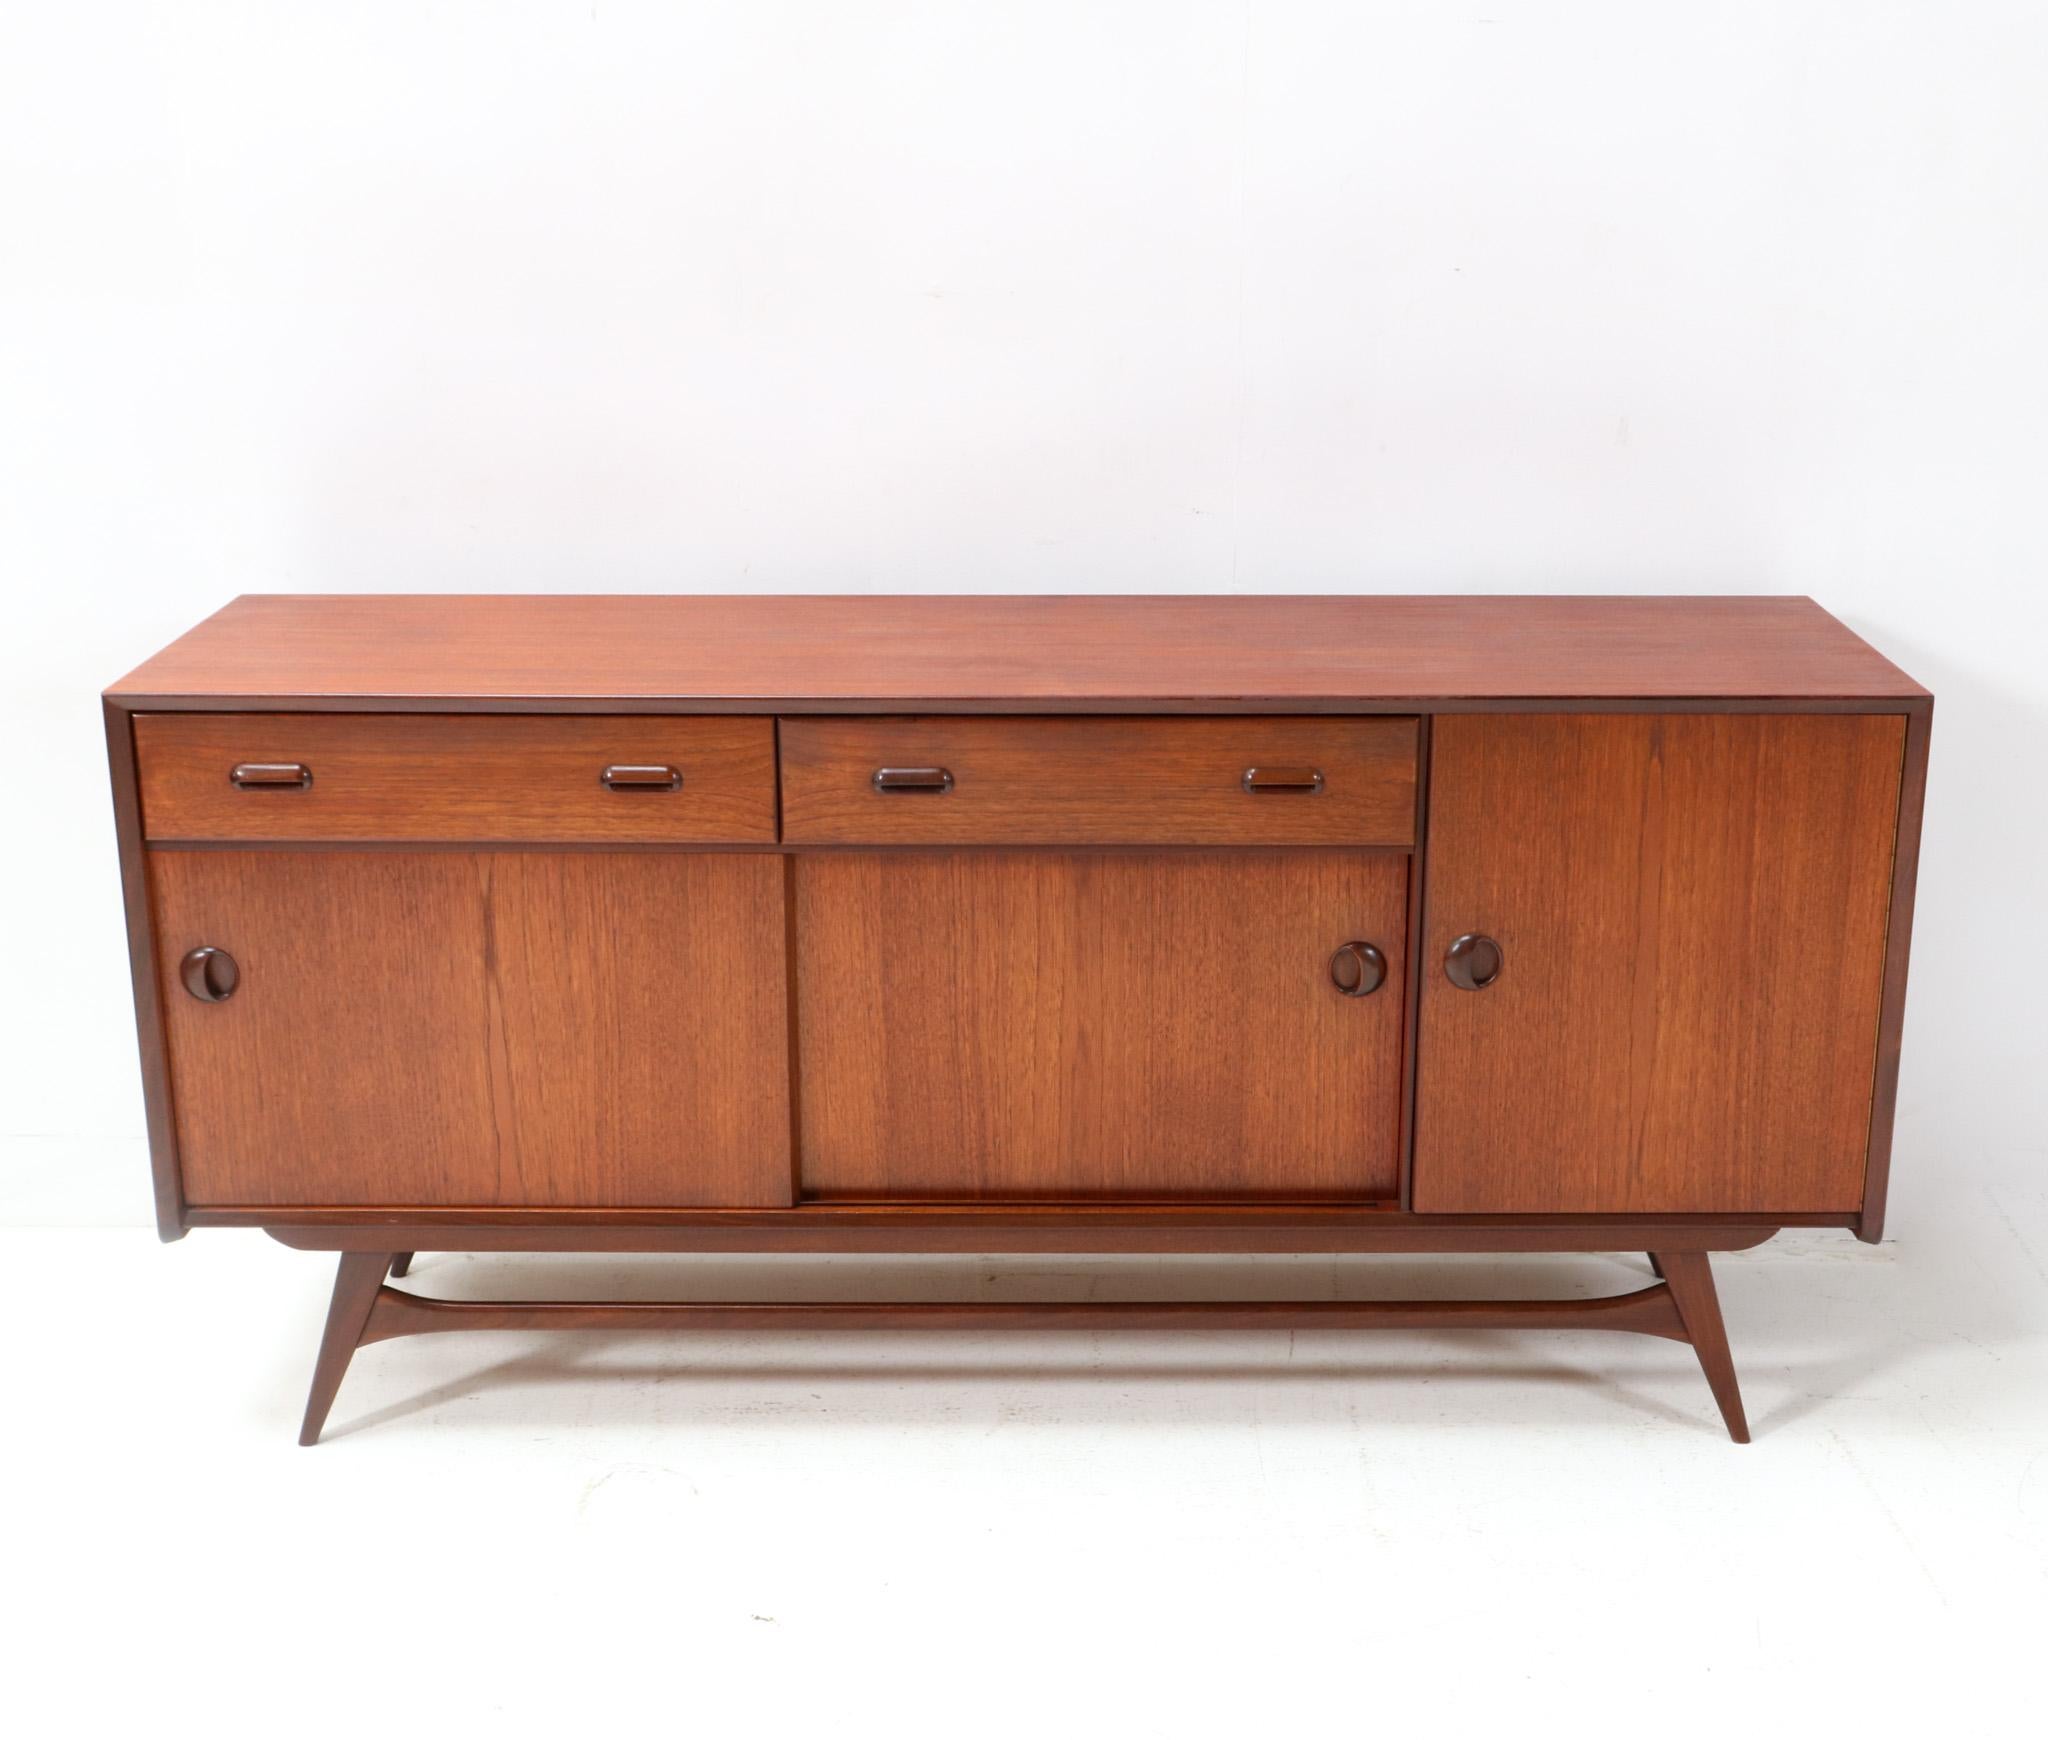 Magnificent and ultra rare Mid-Century Modern credenza or sideboard.
Design by Louis van Teeffelen for WéBé.
Striking Dutch design from the 1950s.
Organic shaped base in solid teak and original teak veneer.
The top is original and veneered with